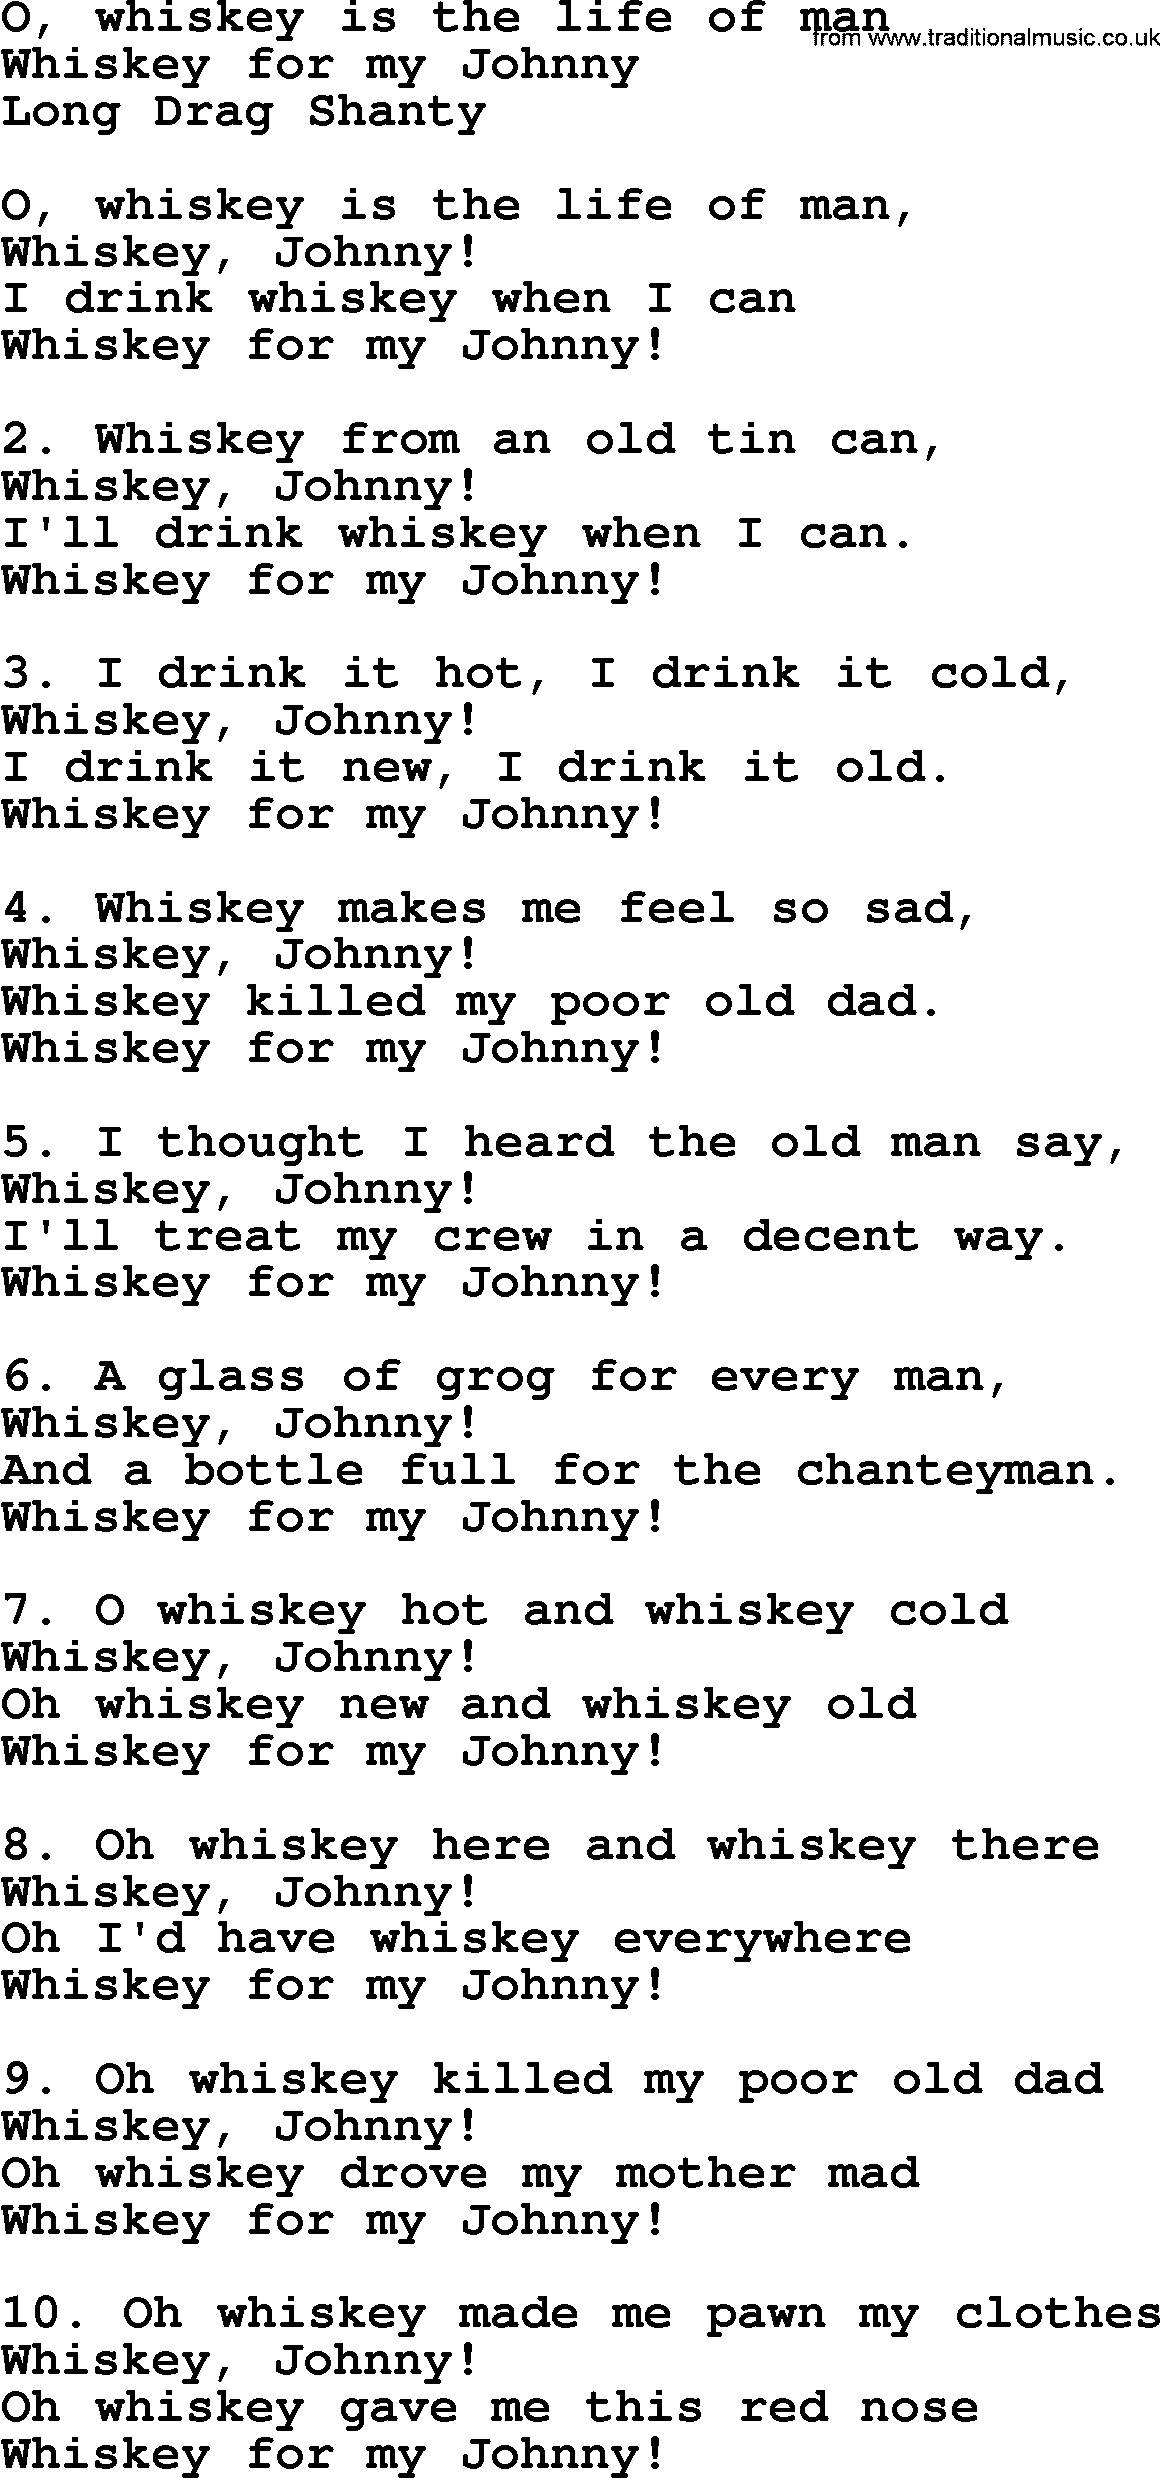 Sea Song or Shantie: O Whiskey Is The Life Of Man, lyrics